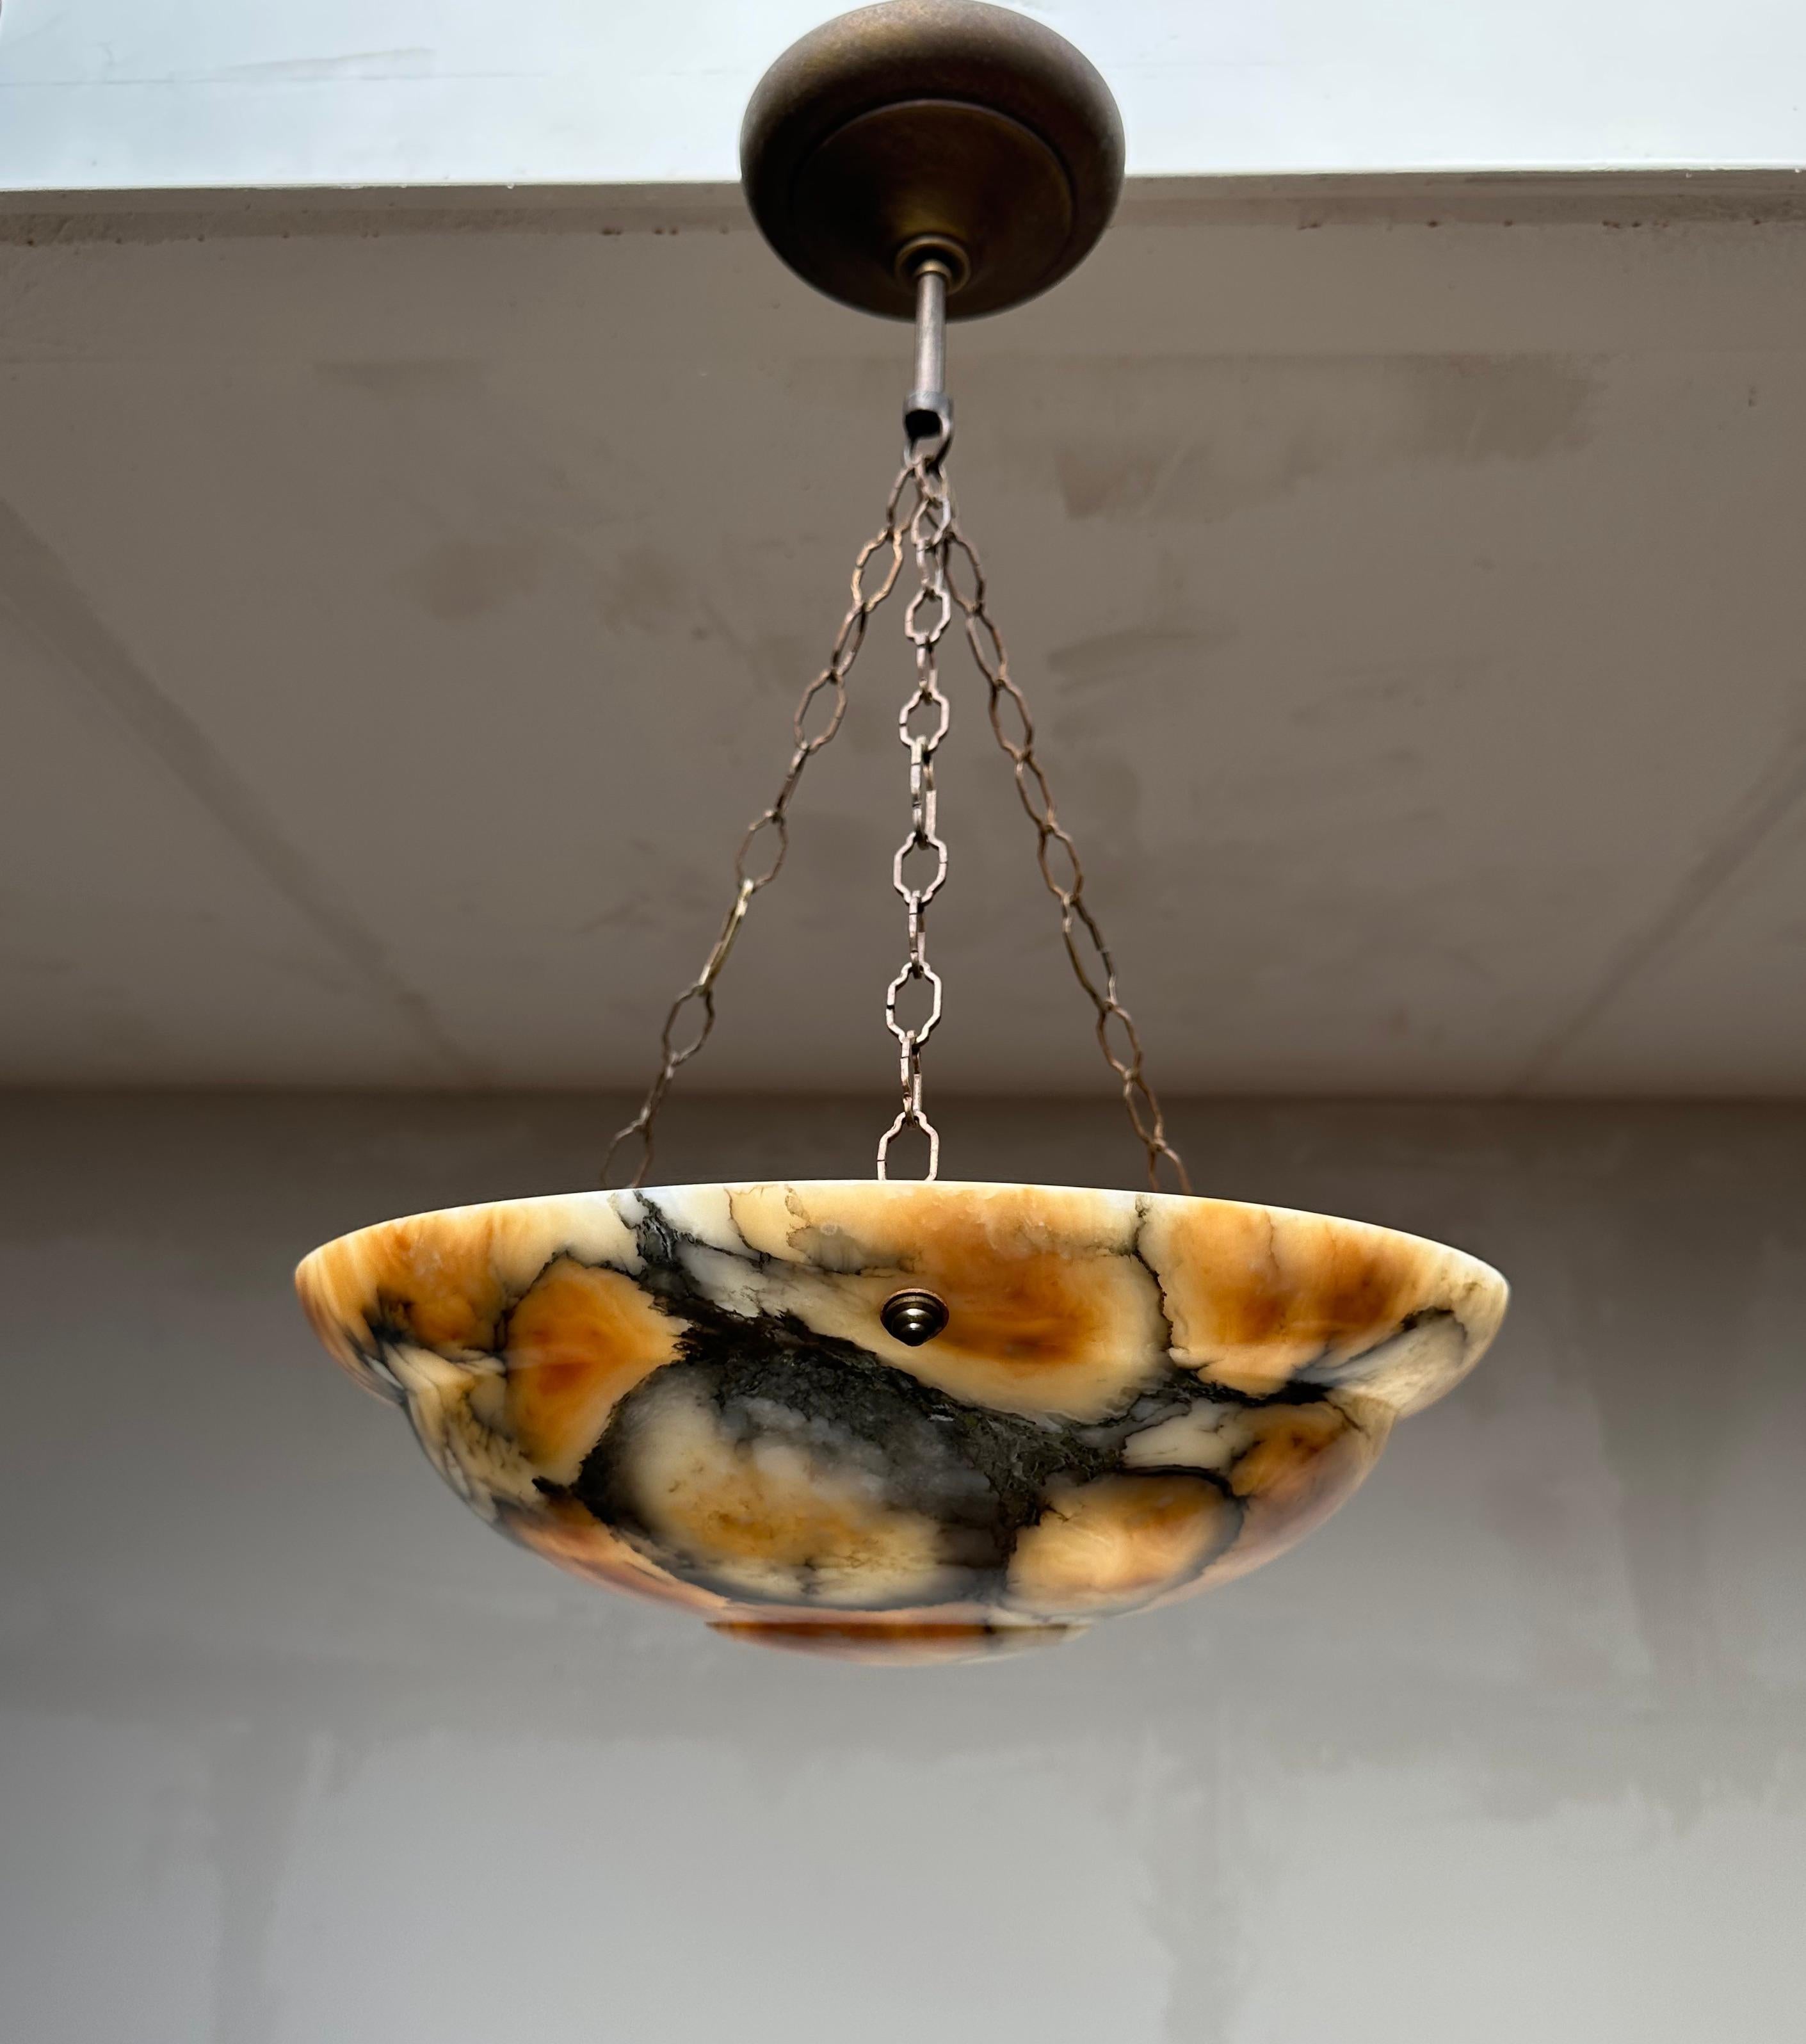 Stunning Art Deco Hand Carved Alabaster & Bronzed Chain Pendant Light, c. 1920 For Sale 3